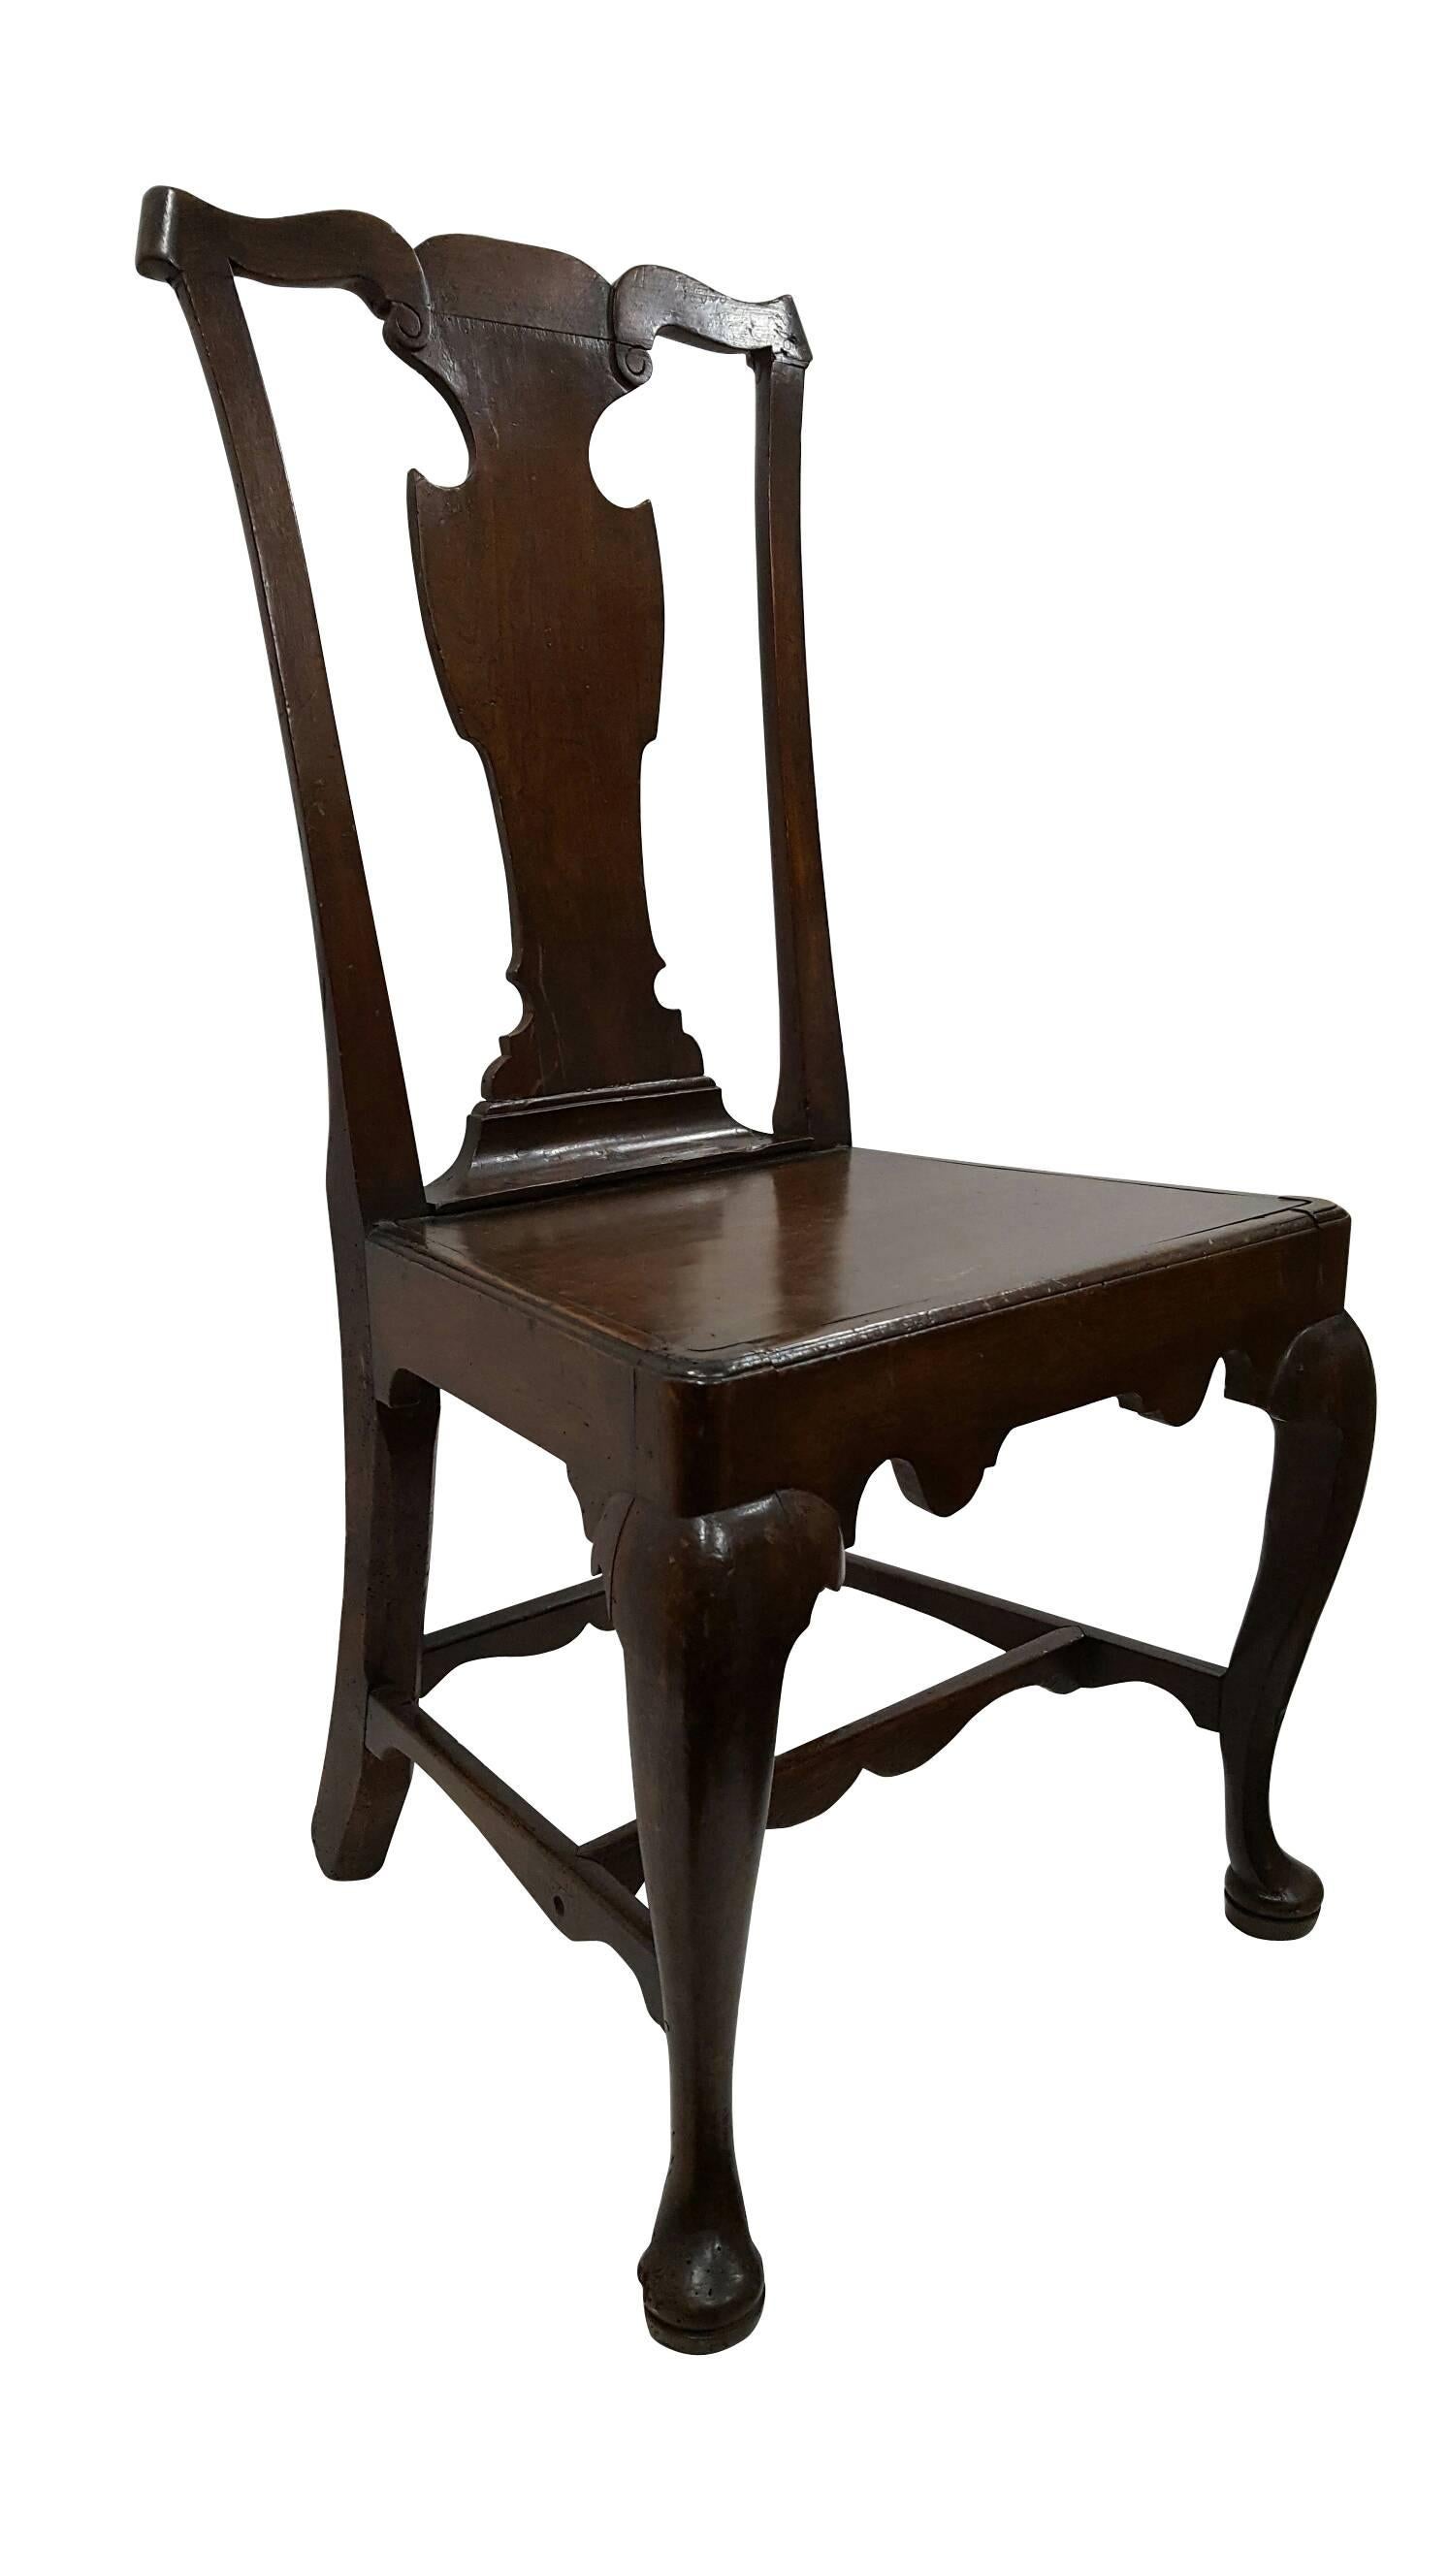 Beautiful 18th century fruitwood Chippendale Country chair
Dimensions: 39'' H, 20.5'' W, 15'' D.